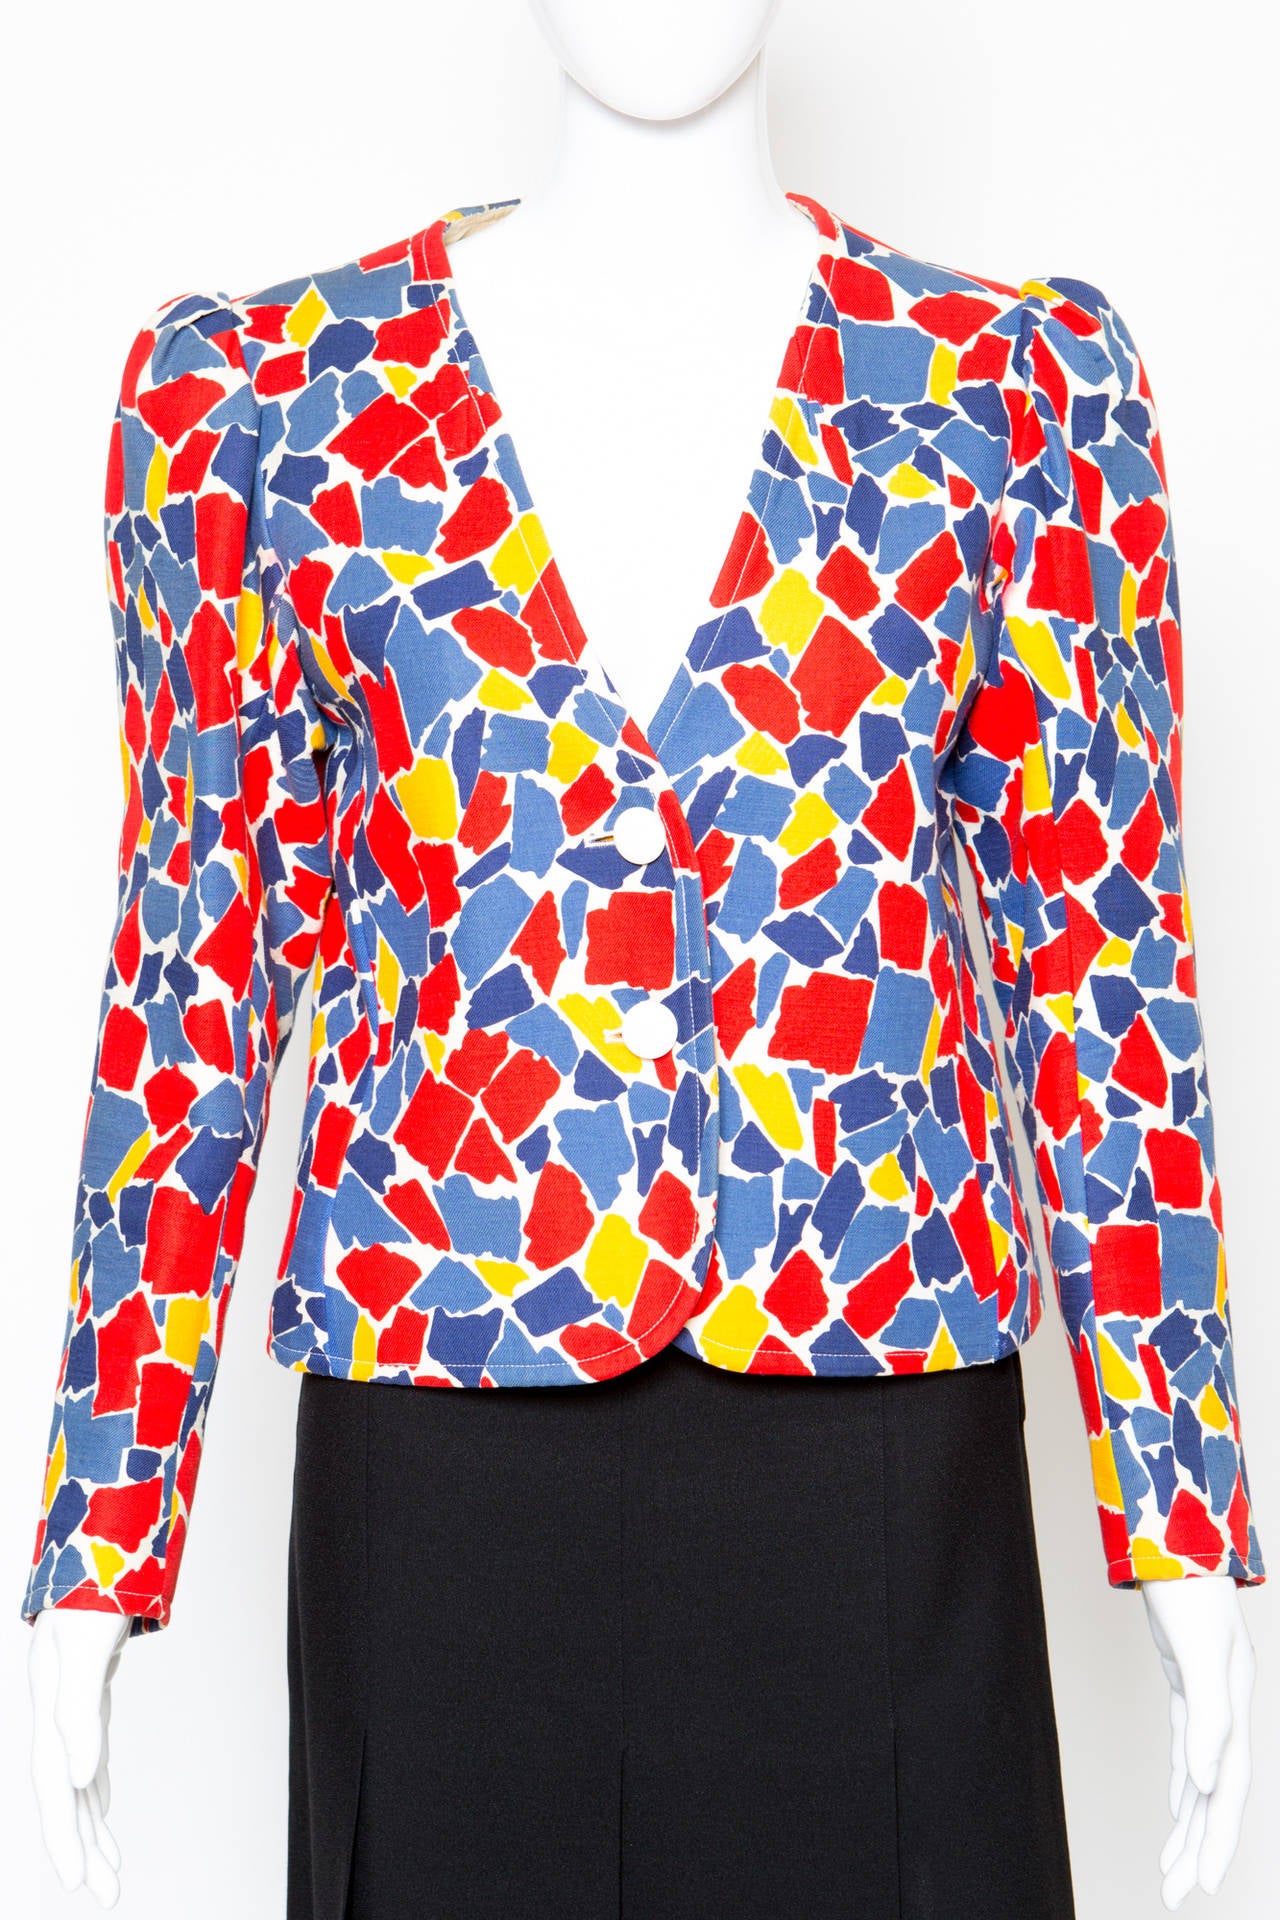 1980s Yves Saint Laurent YSL multico printed jacket featuring a geometric yellow, blue & red geometric pattern in a heavy wool fabric, fancy pleats at sleeves, deep 